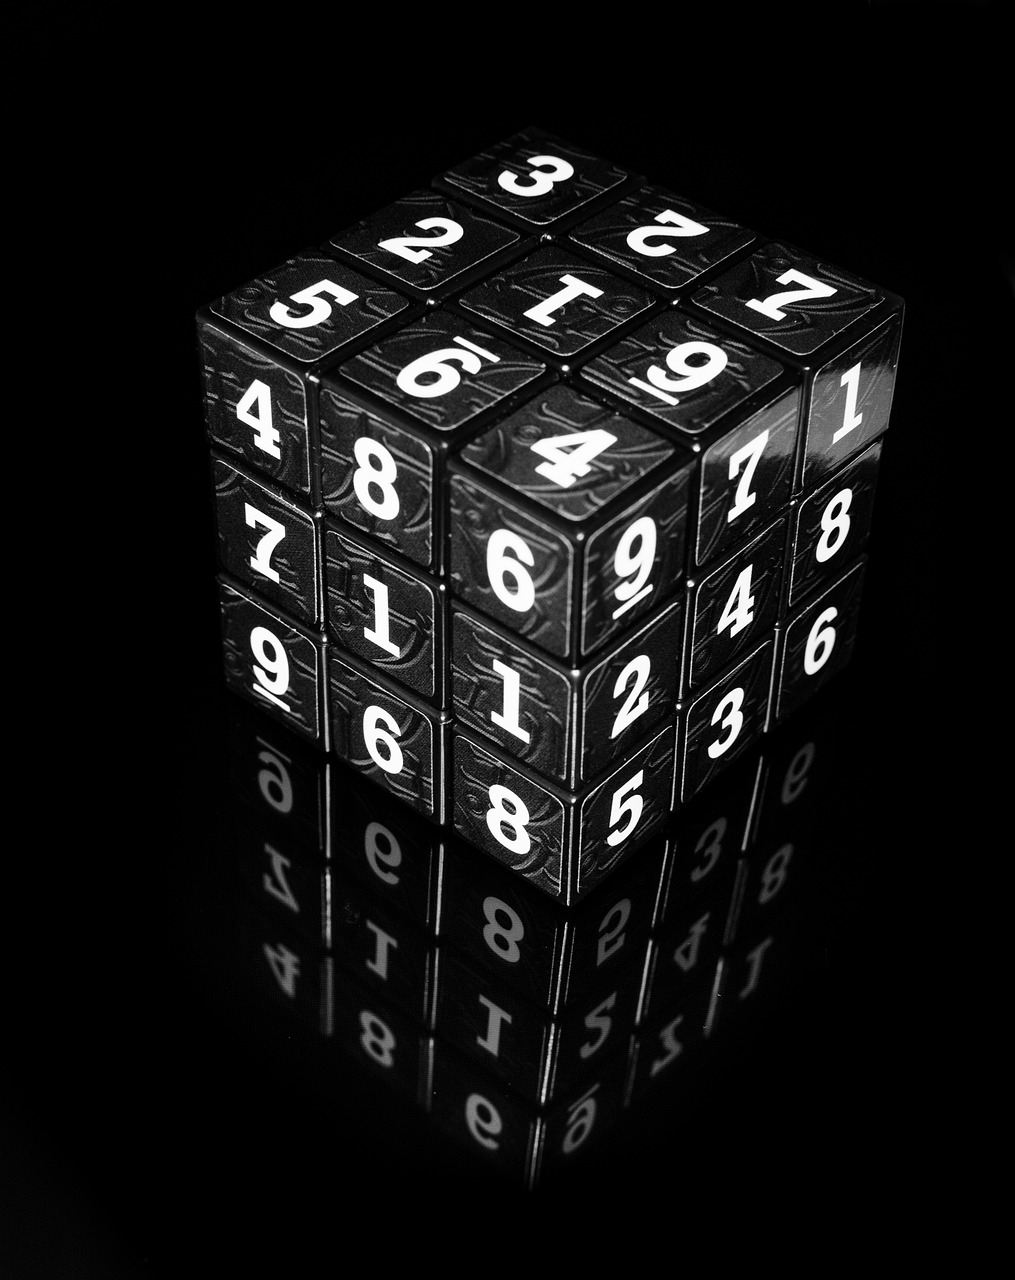 cube numbers block free photo